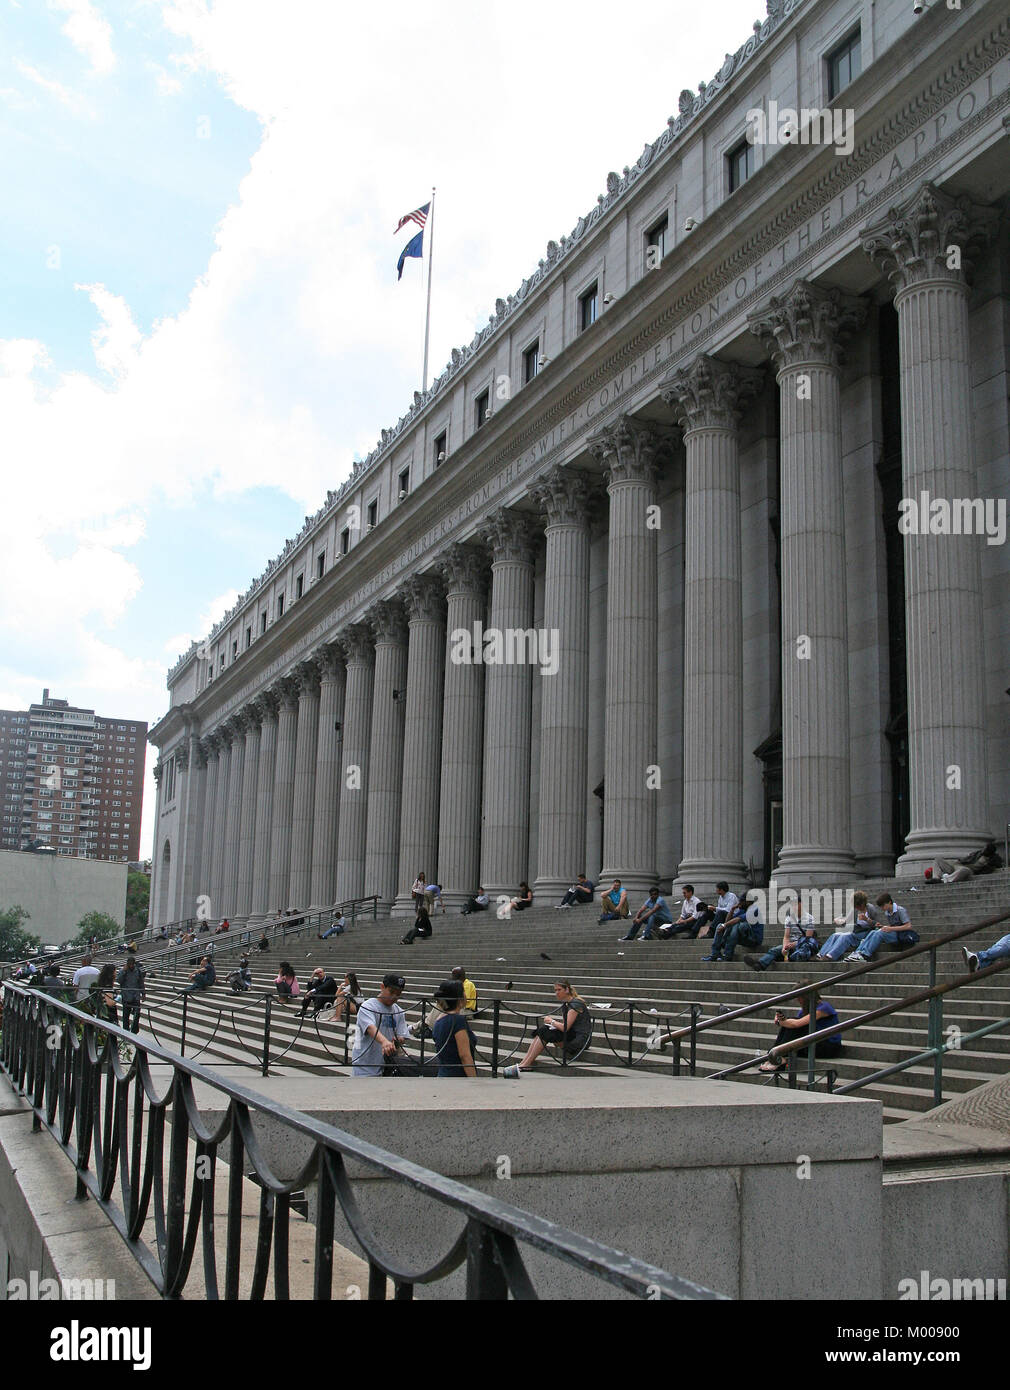 The James A. Farley Post Office Building, New York City, New York State, USA. Stock Photo